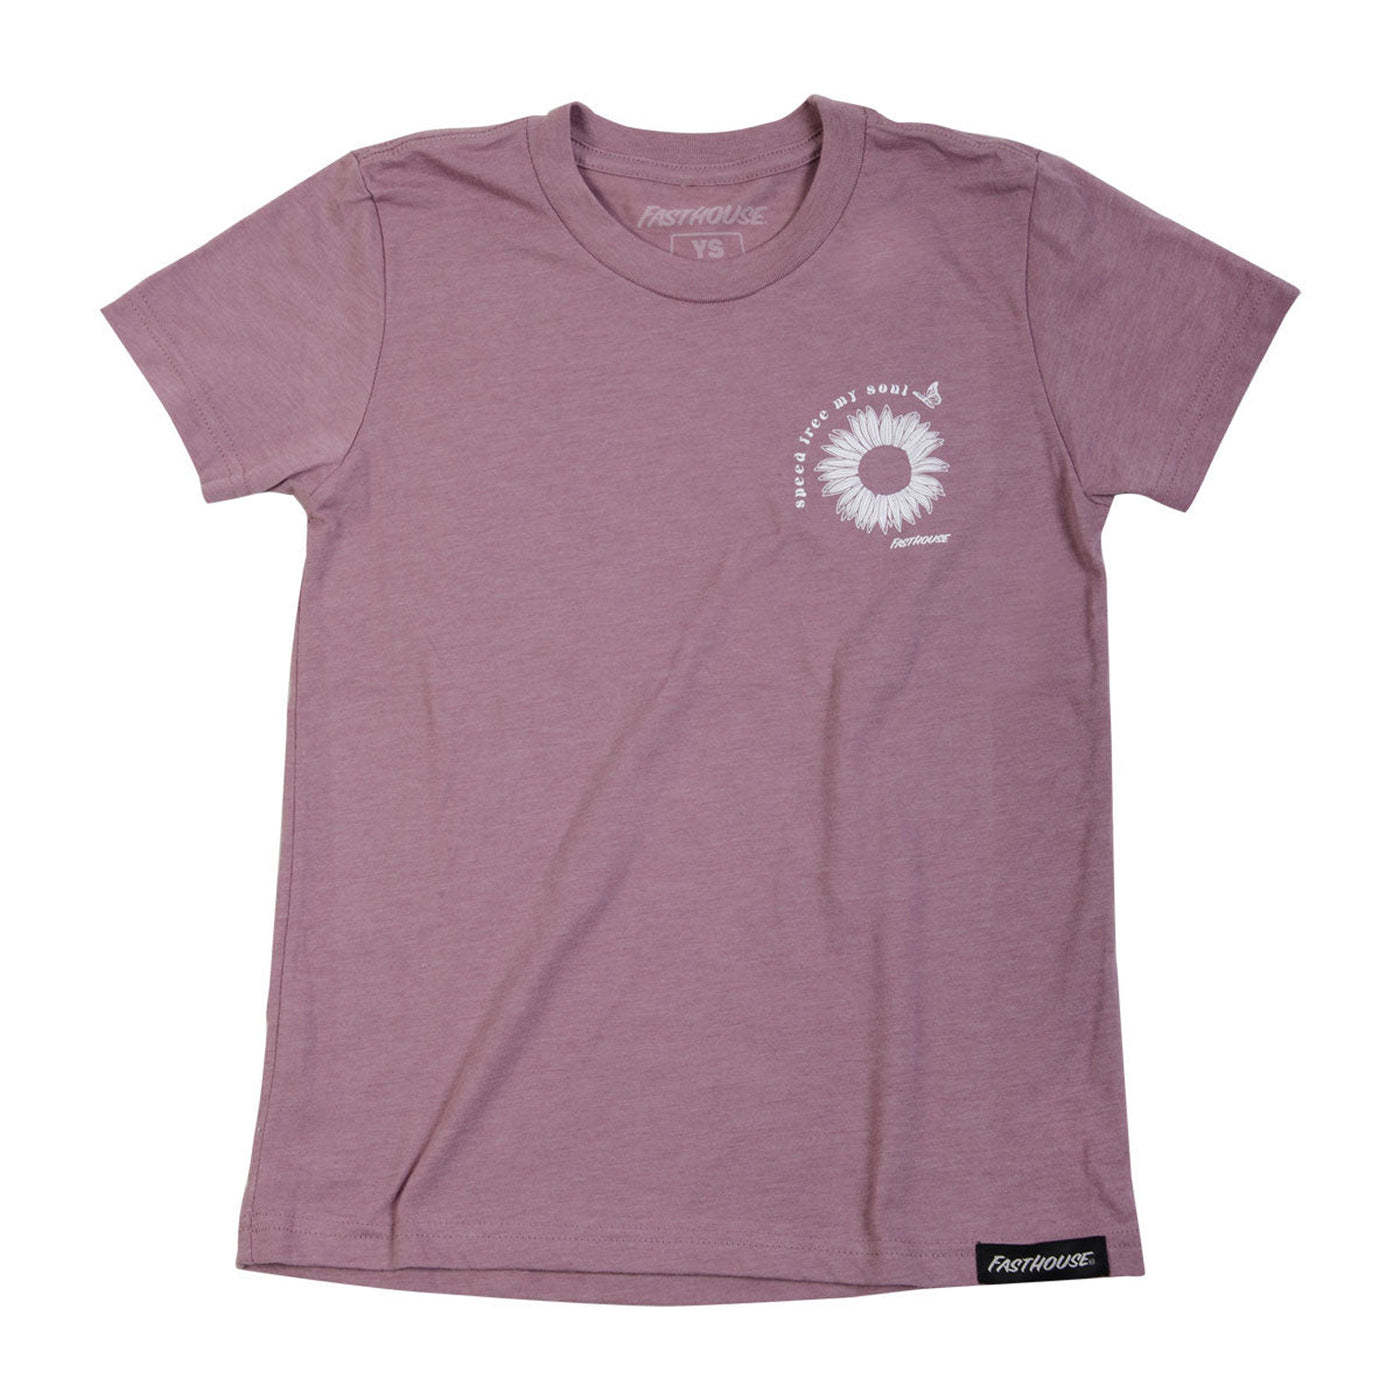 Fasthouse Girl's Allure Tee